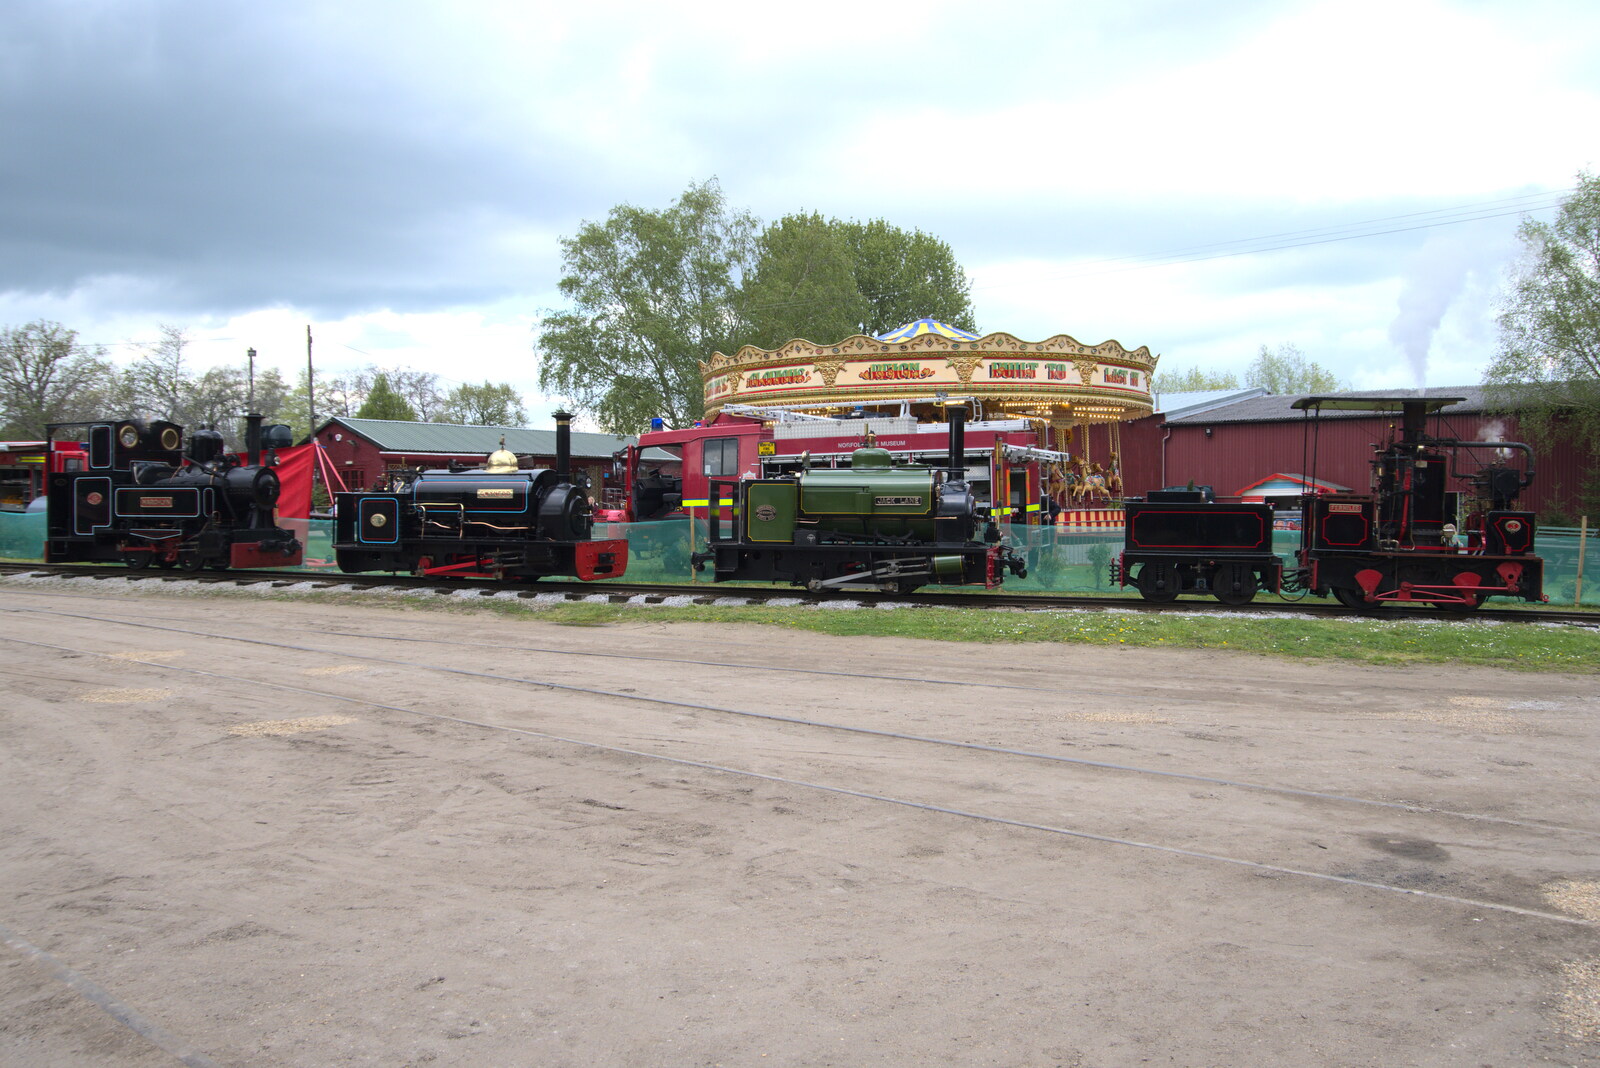 All four narrow-guage engines are lined up from The Heritage Steam Gala, Bressingham Steam Museum, Norfolk - 1st May 2023